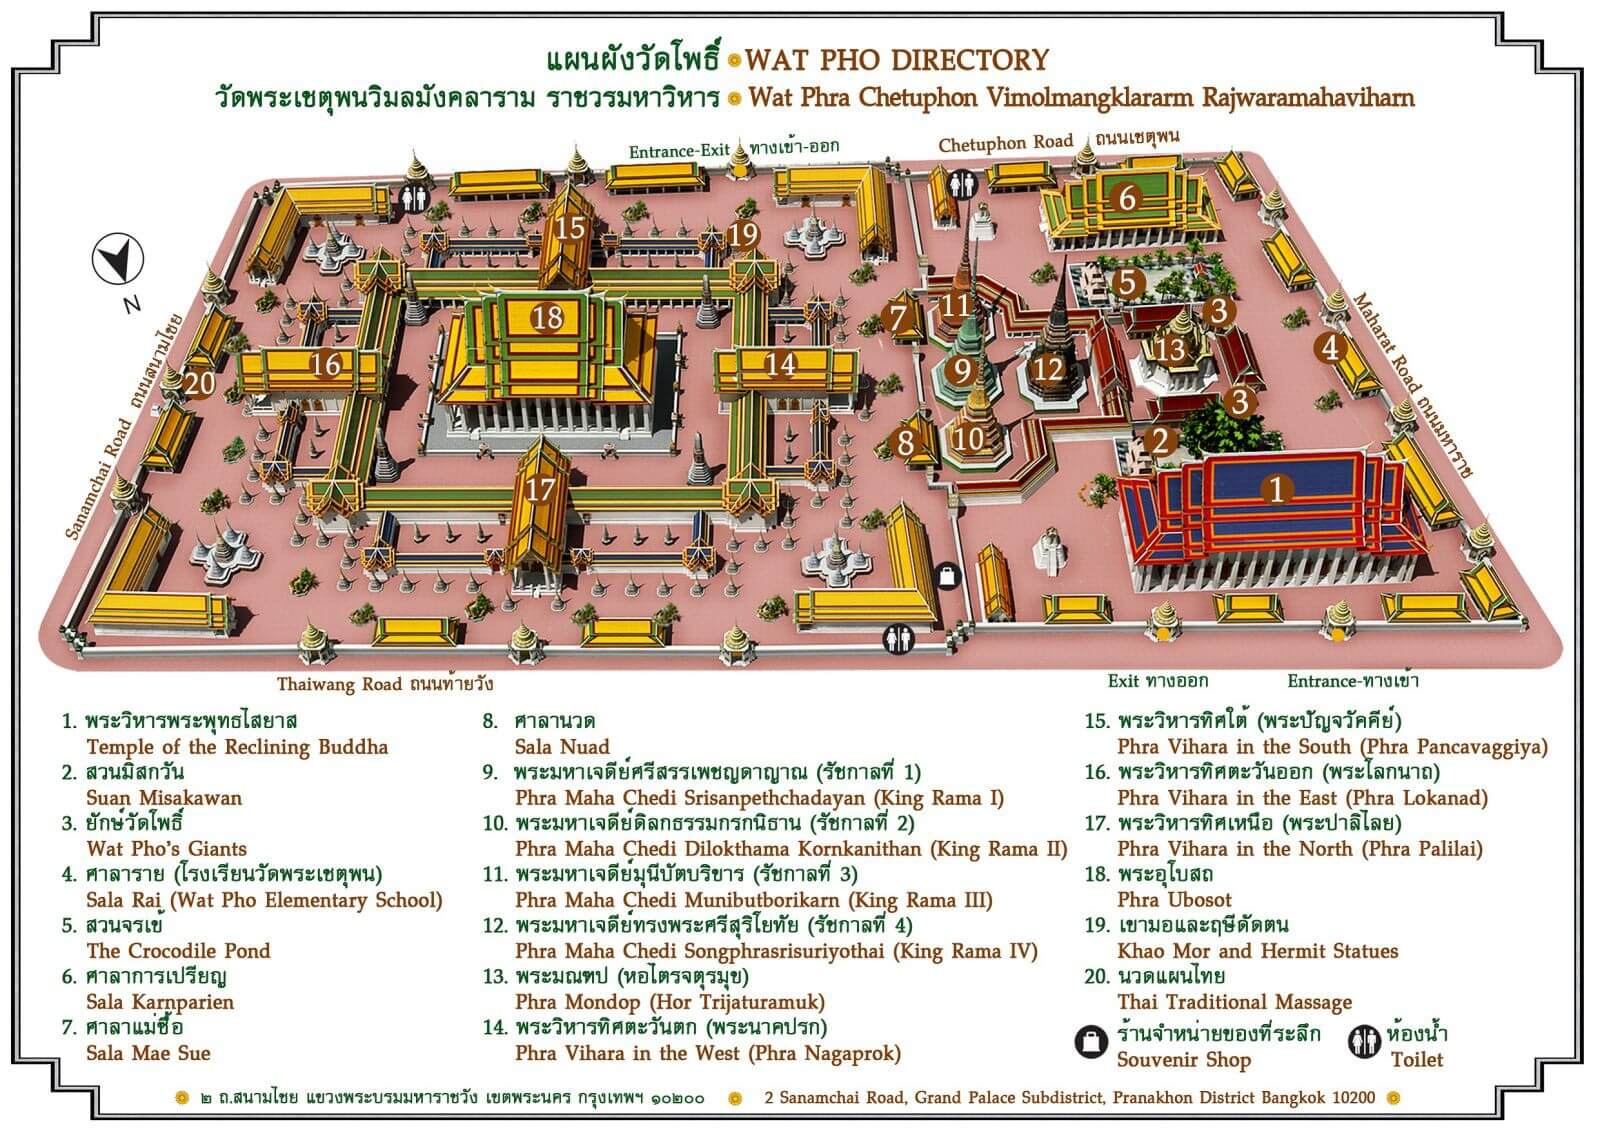 Temple of the Reclining Buddha (WAT PHO) Directory. The map of the temple complex.